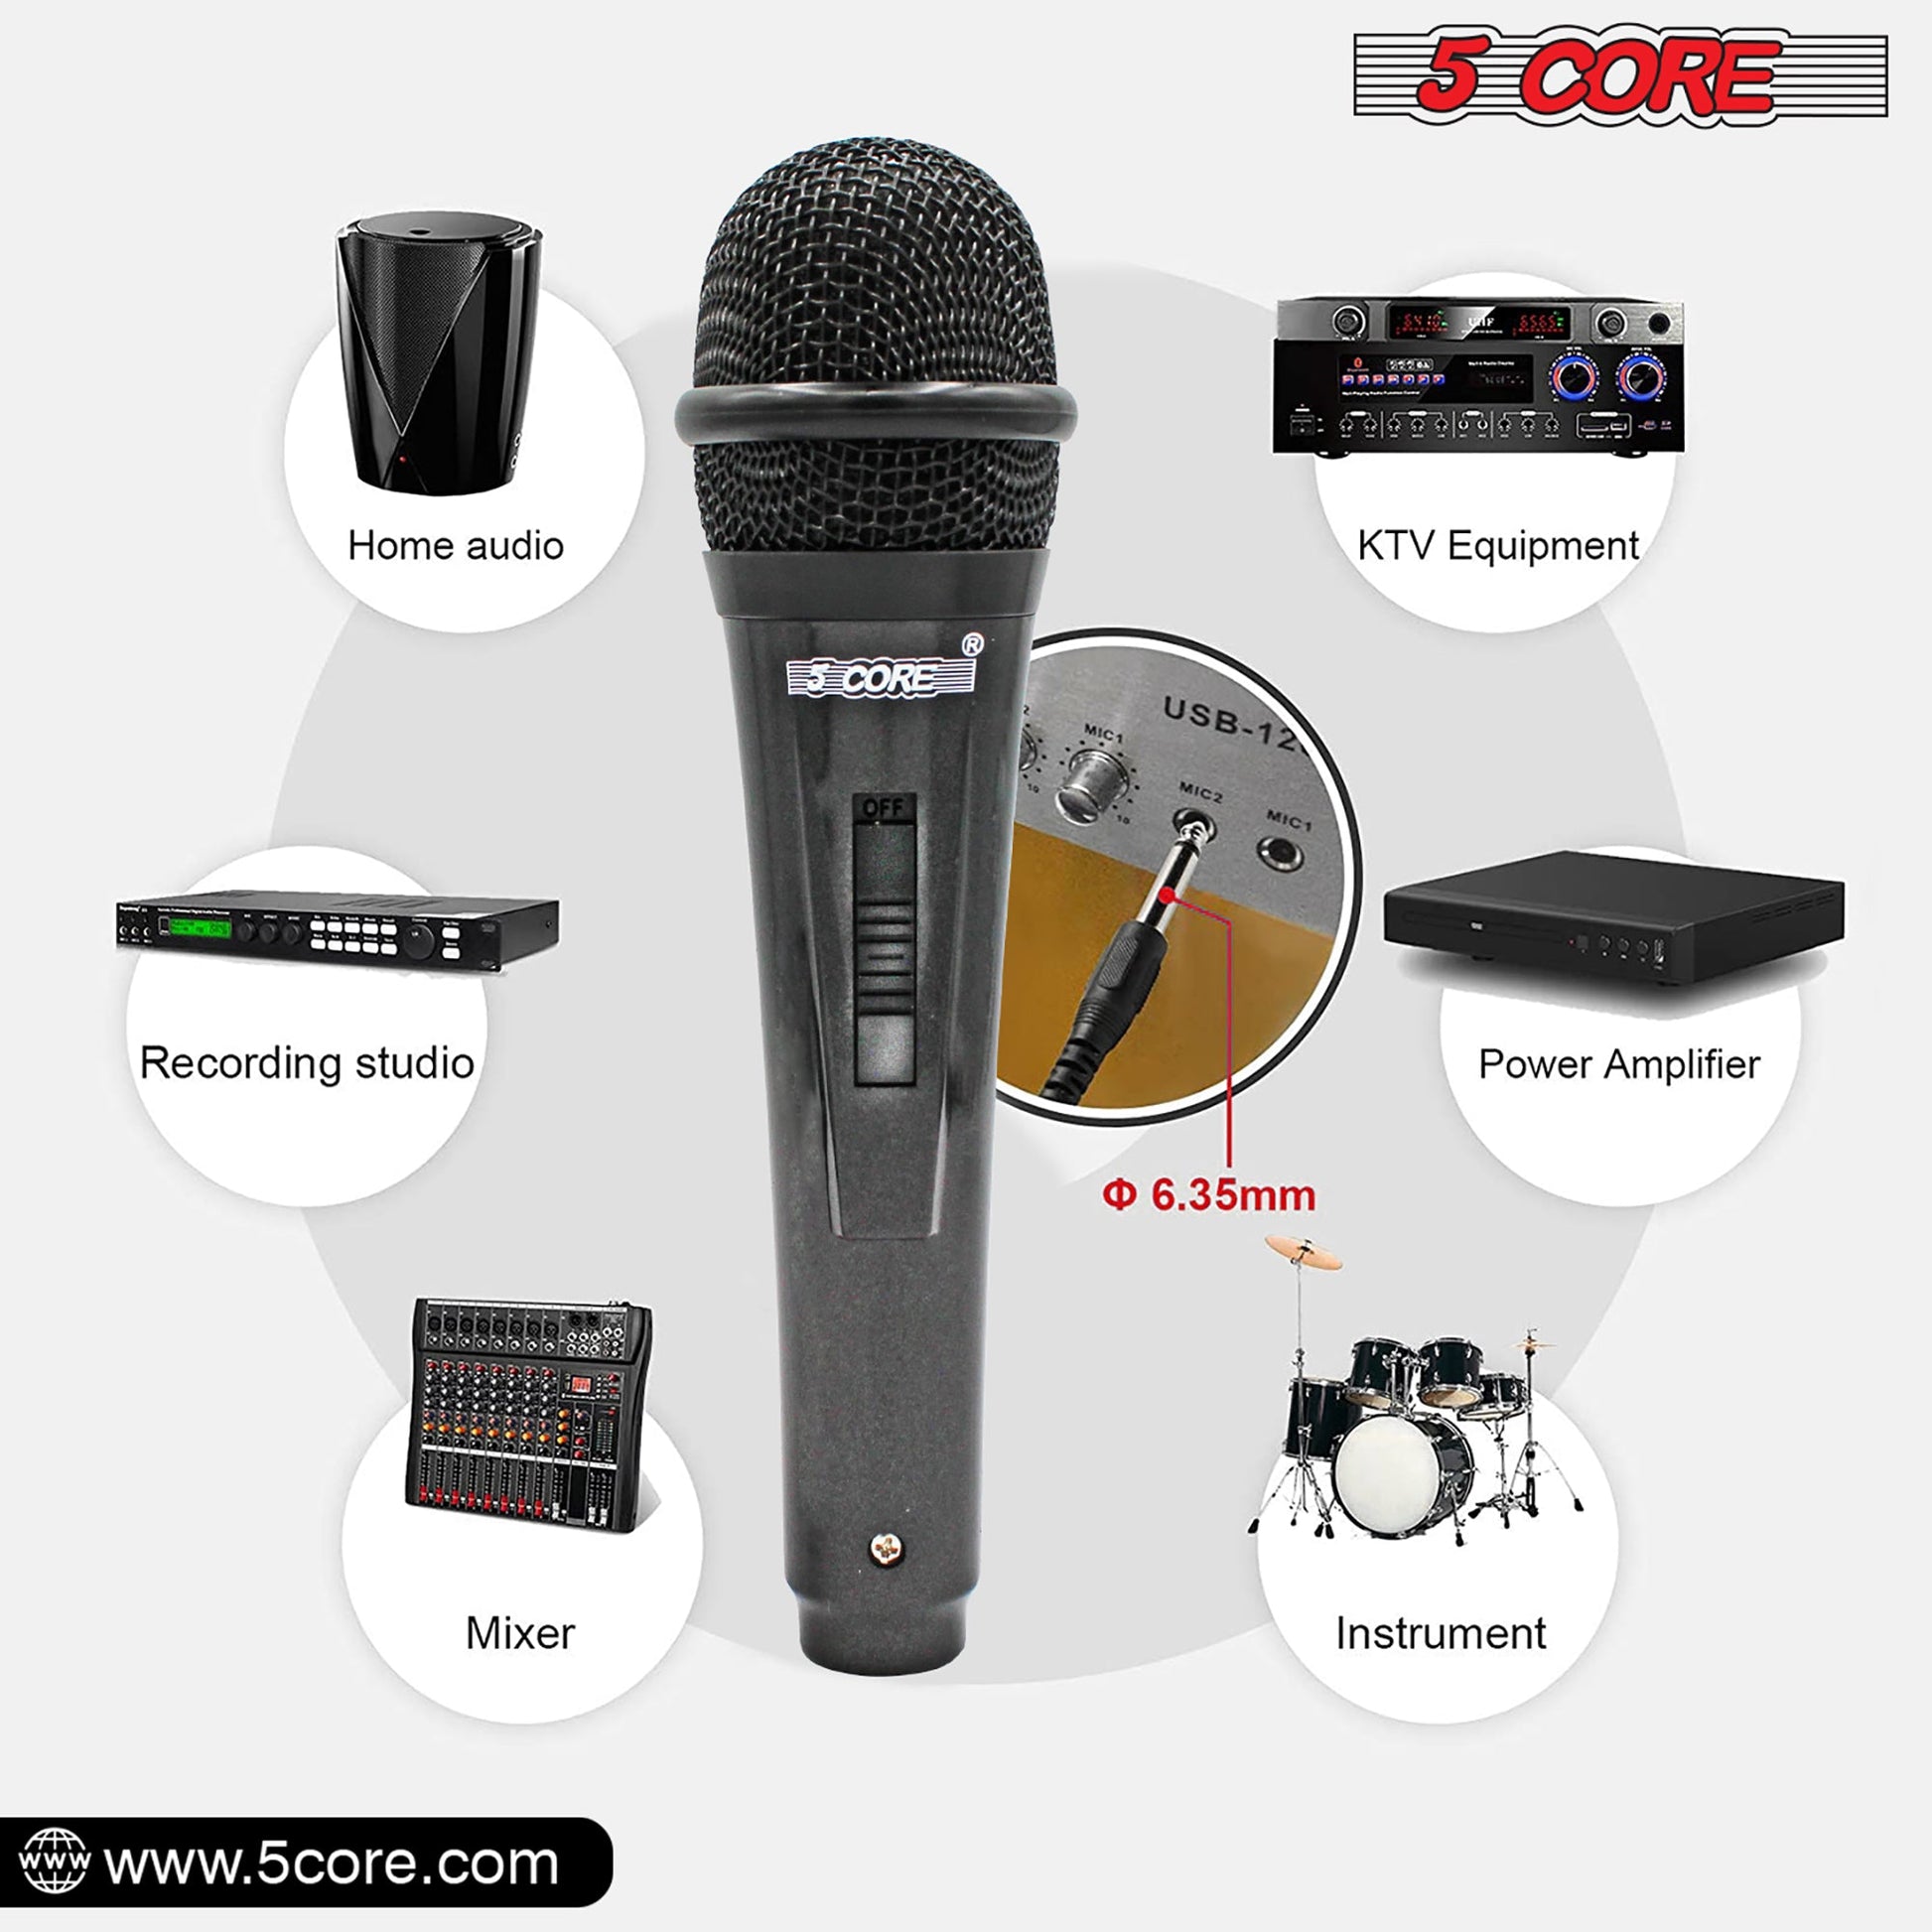 5 Core Microphone 1 Piece Professional Black Dynamic Karaoke XLR Wired Mic w ON/OFF Switch Integrated Pop Filter Cardioid Unidirectional Pickup Handheld Micrófono for Singing DJ Podcast Speeches Includes Cable Mic Holder - PM 816-10